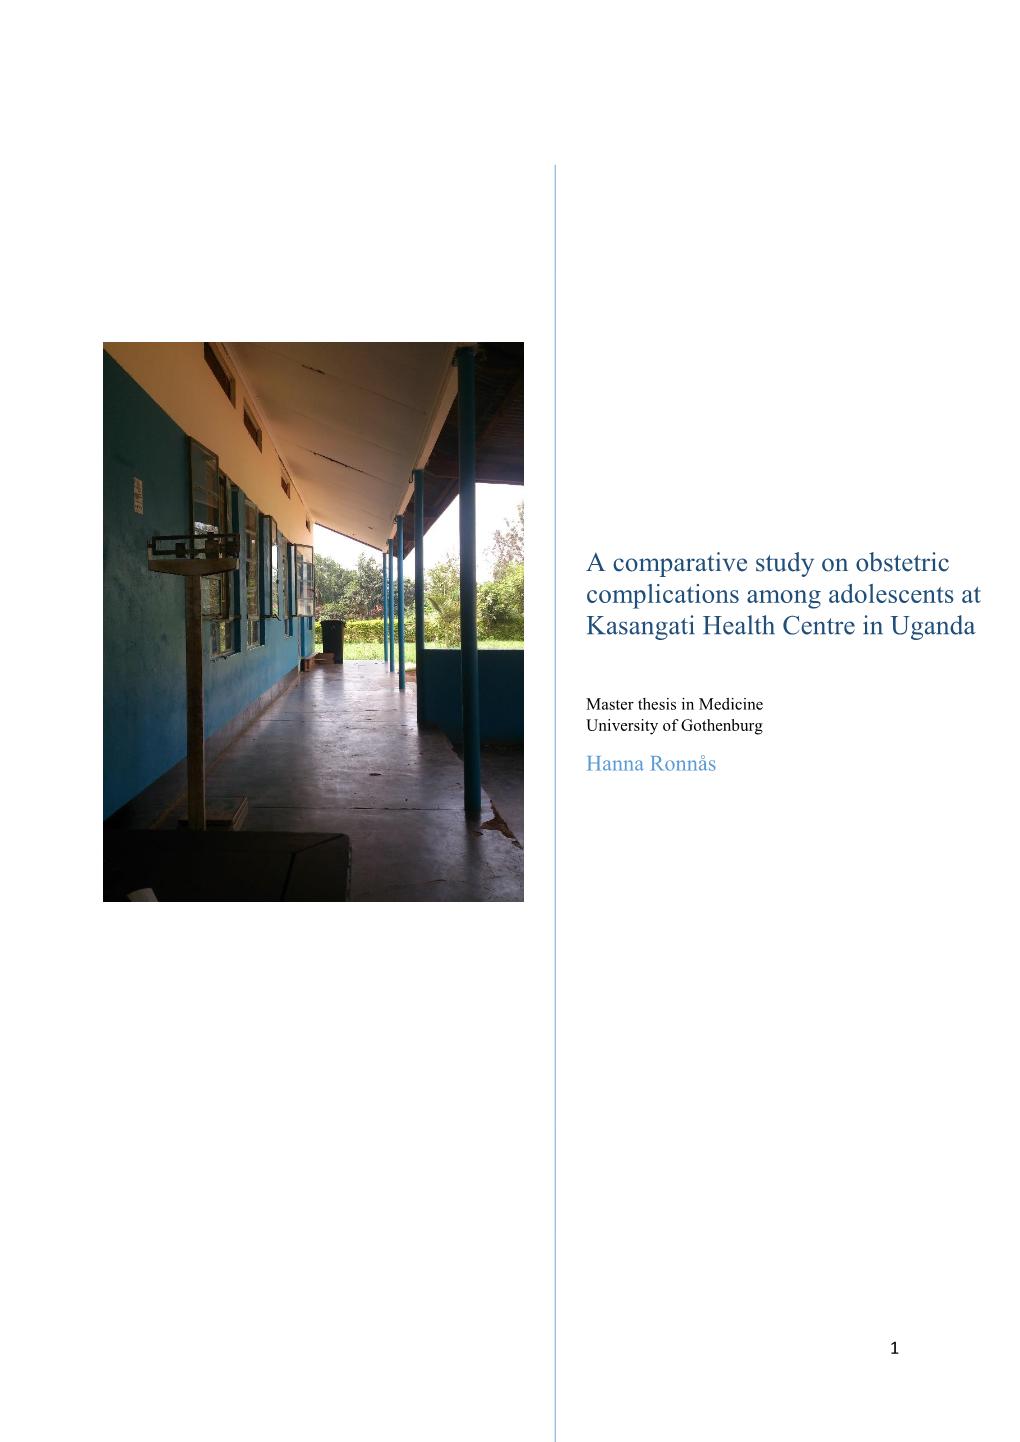 A Comparative Study on Obstetric Complications Among Adolescents at Kasangati Health Centre in Uganda